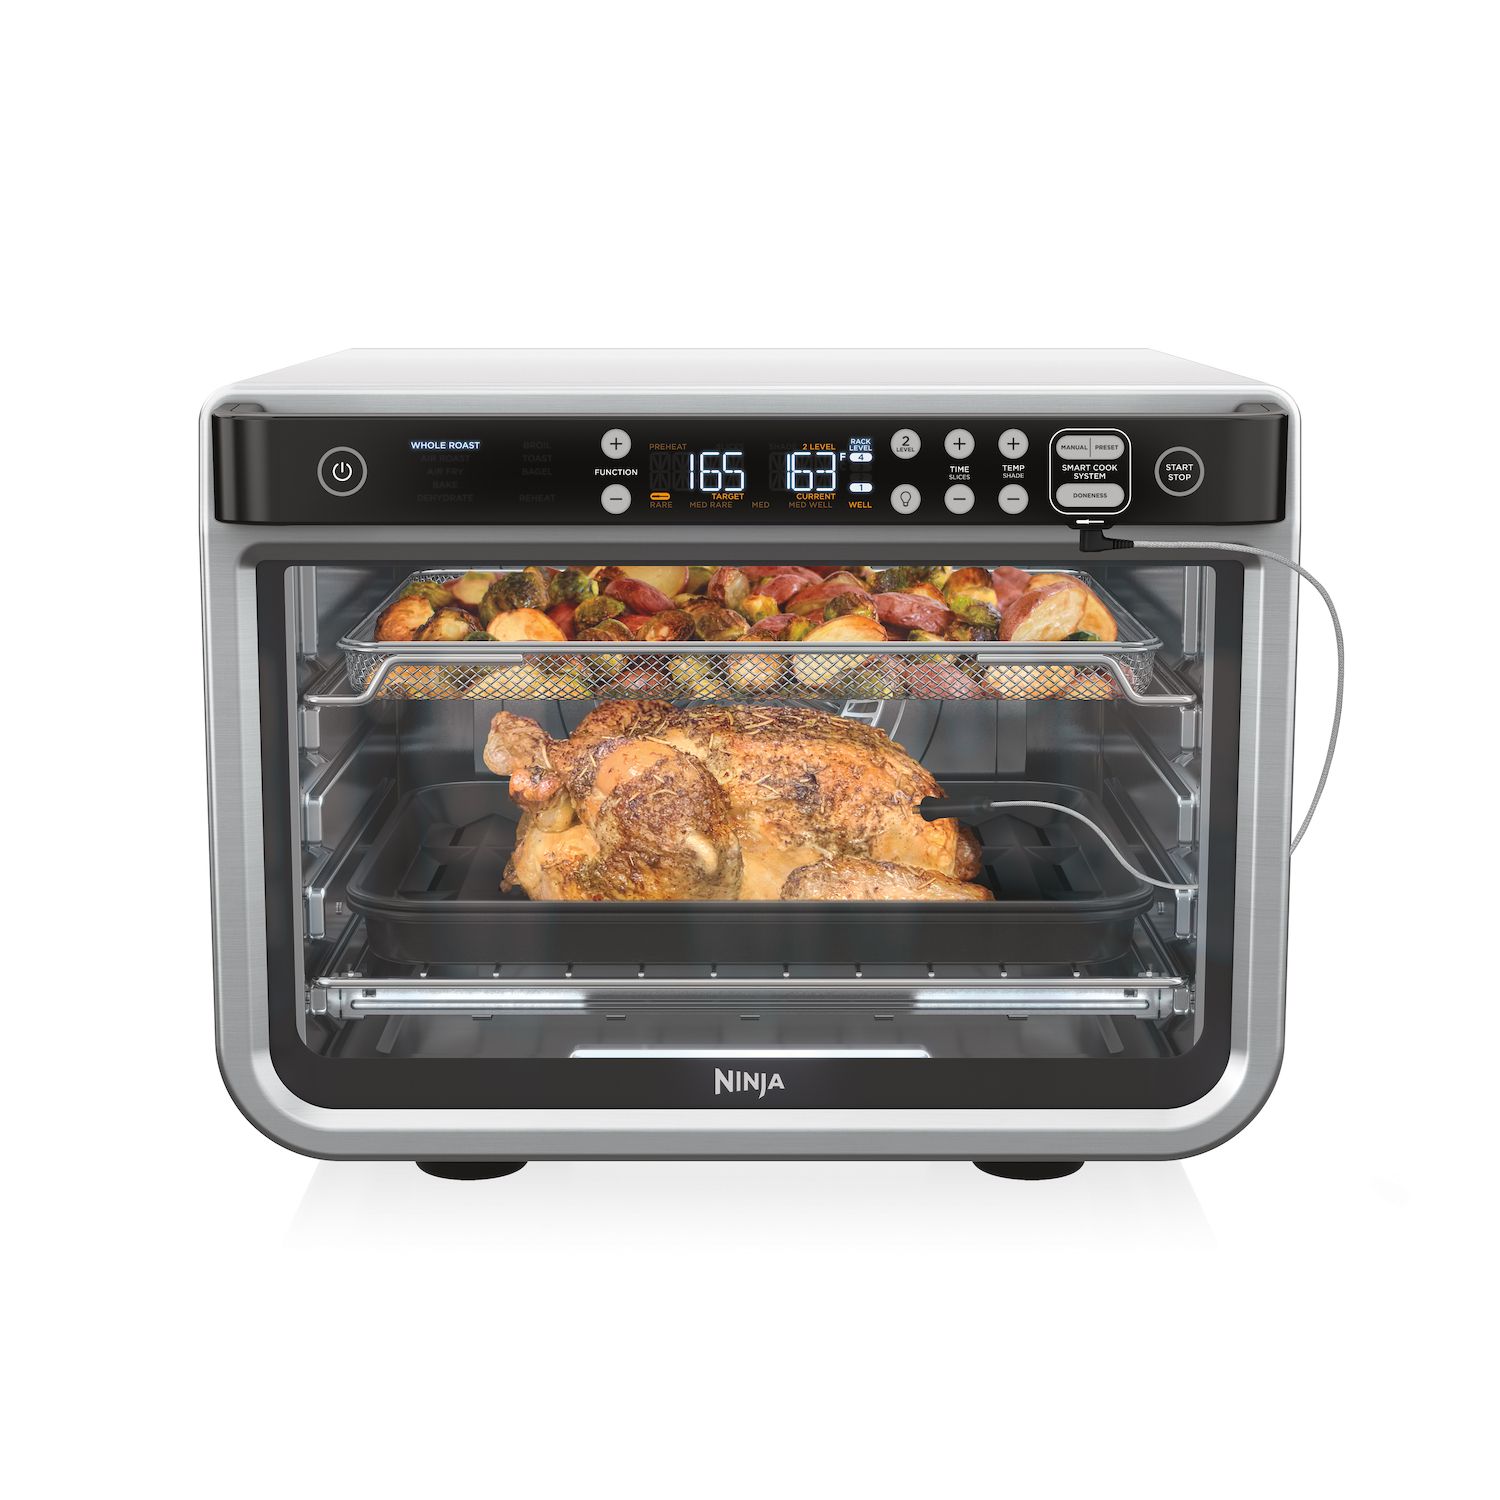 Homcom Air Fryers 4Qt, 4-in-1 Hot Oven with Air Fry, Roast, Broil, Crisp,  Bake Function, Digital Touchscreen, 60